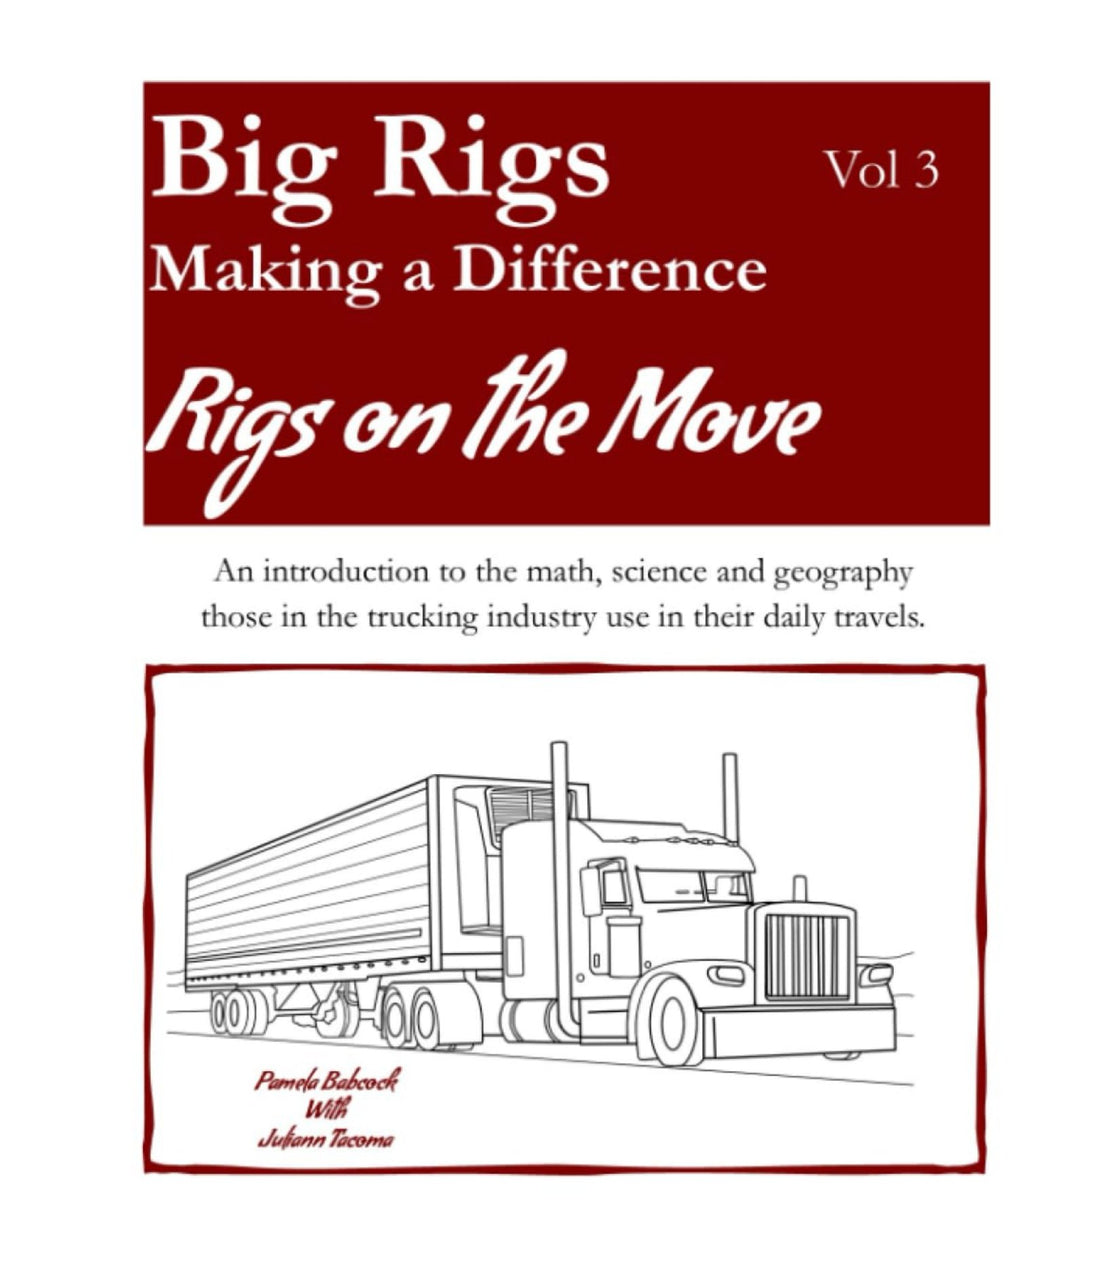 Big Rigs Making a Difference Volume 3 - Diesel Freak